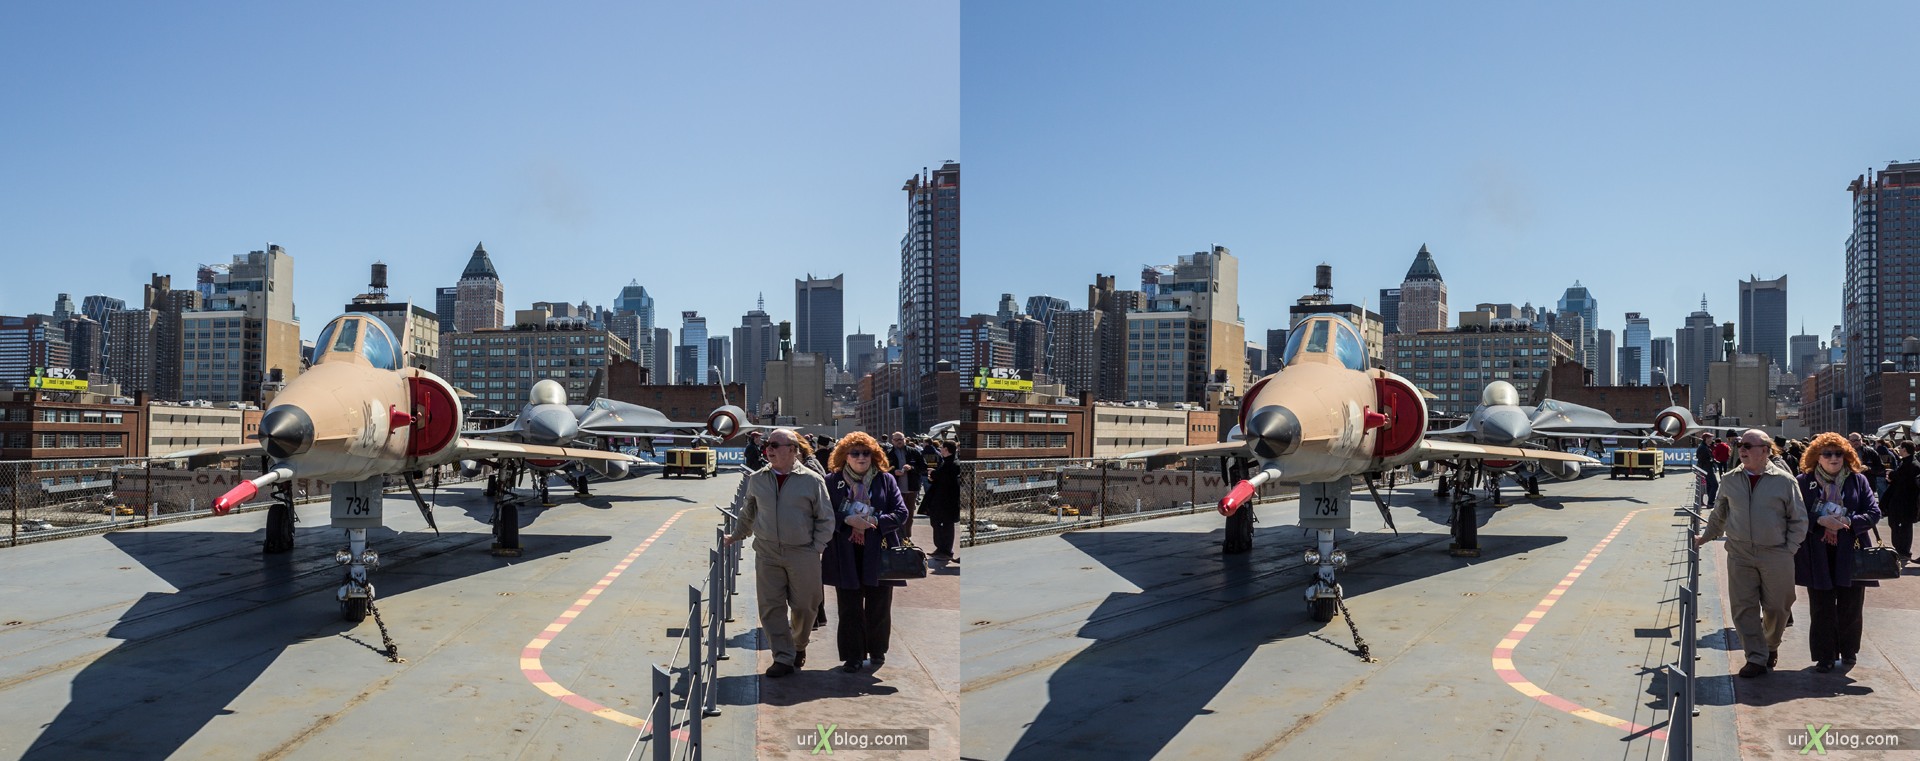 2013, USA, NYC, New York, aircraft carrier Intrepid museum, Israel Aircraft Industries Kfir, sea, air, space, ship, submarine, aircraft, airplane, helicopter, military, 3D, stereo pair, cross-eyed, crossview, cross view stereo pair, stereoscopic